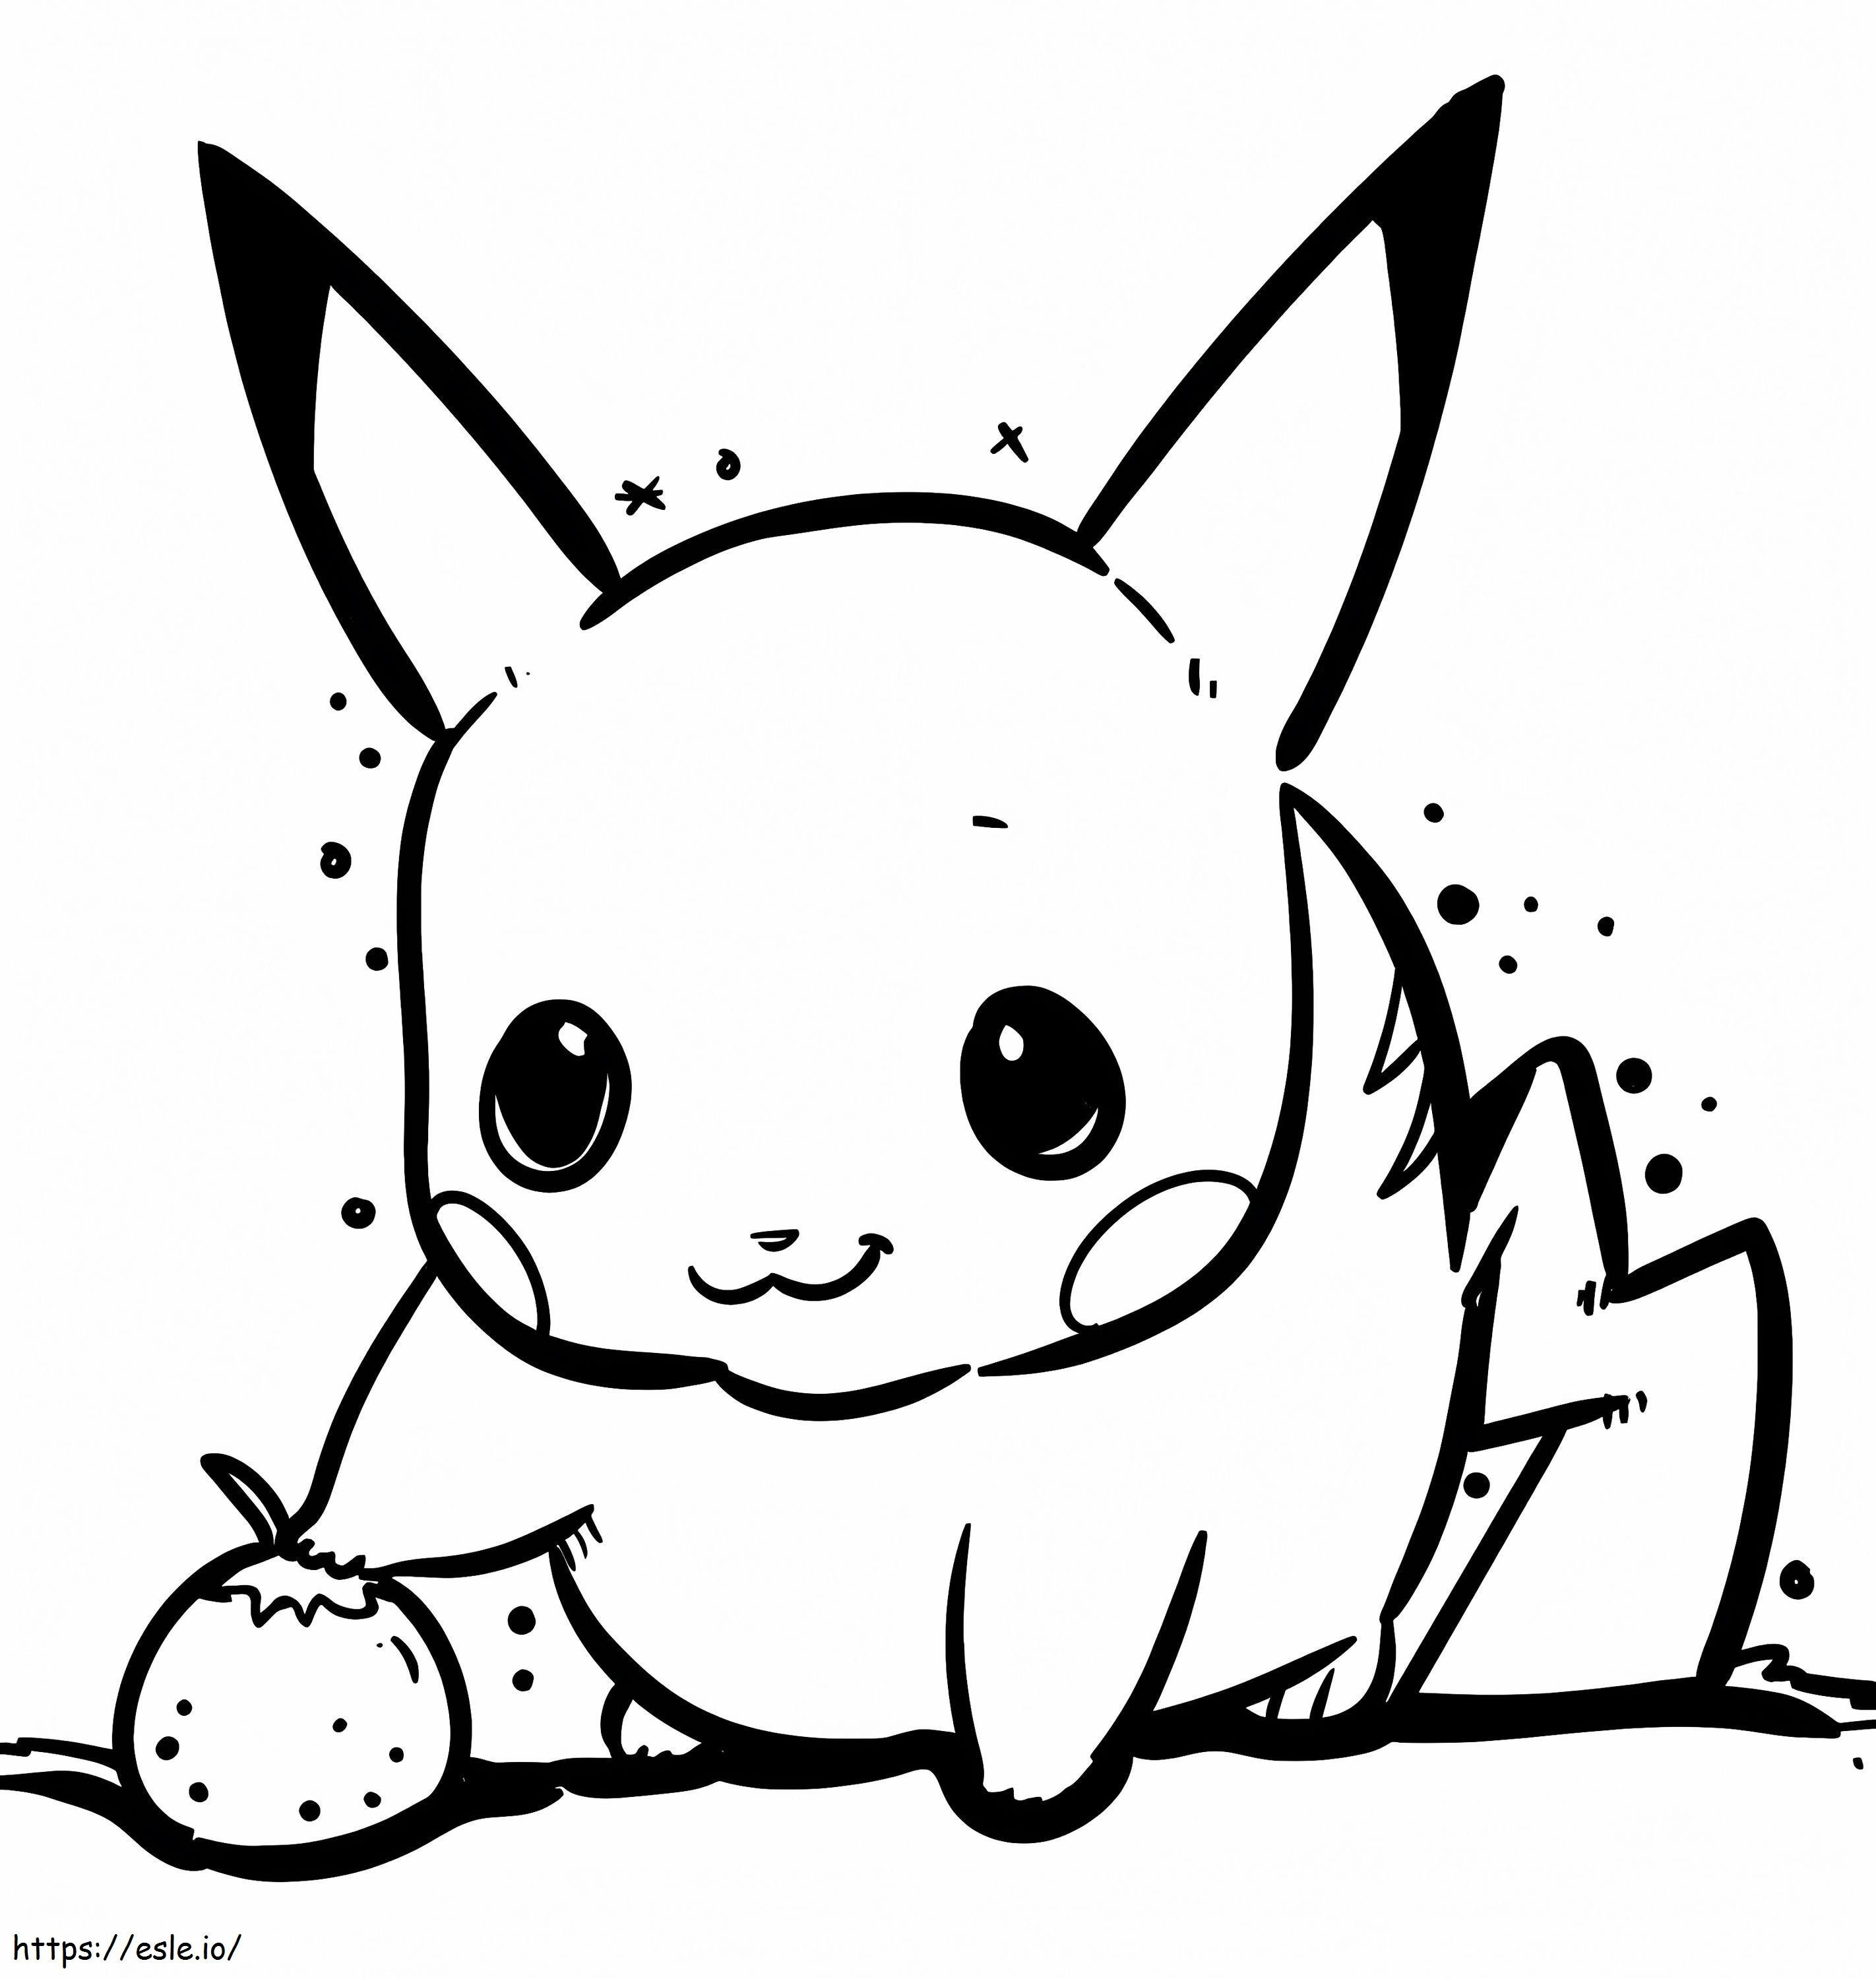 Pikachu With Strawberry coloring page